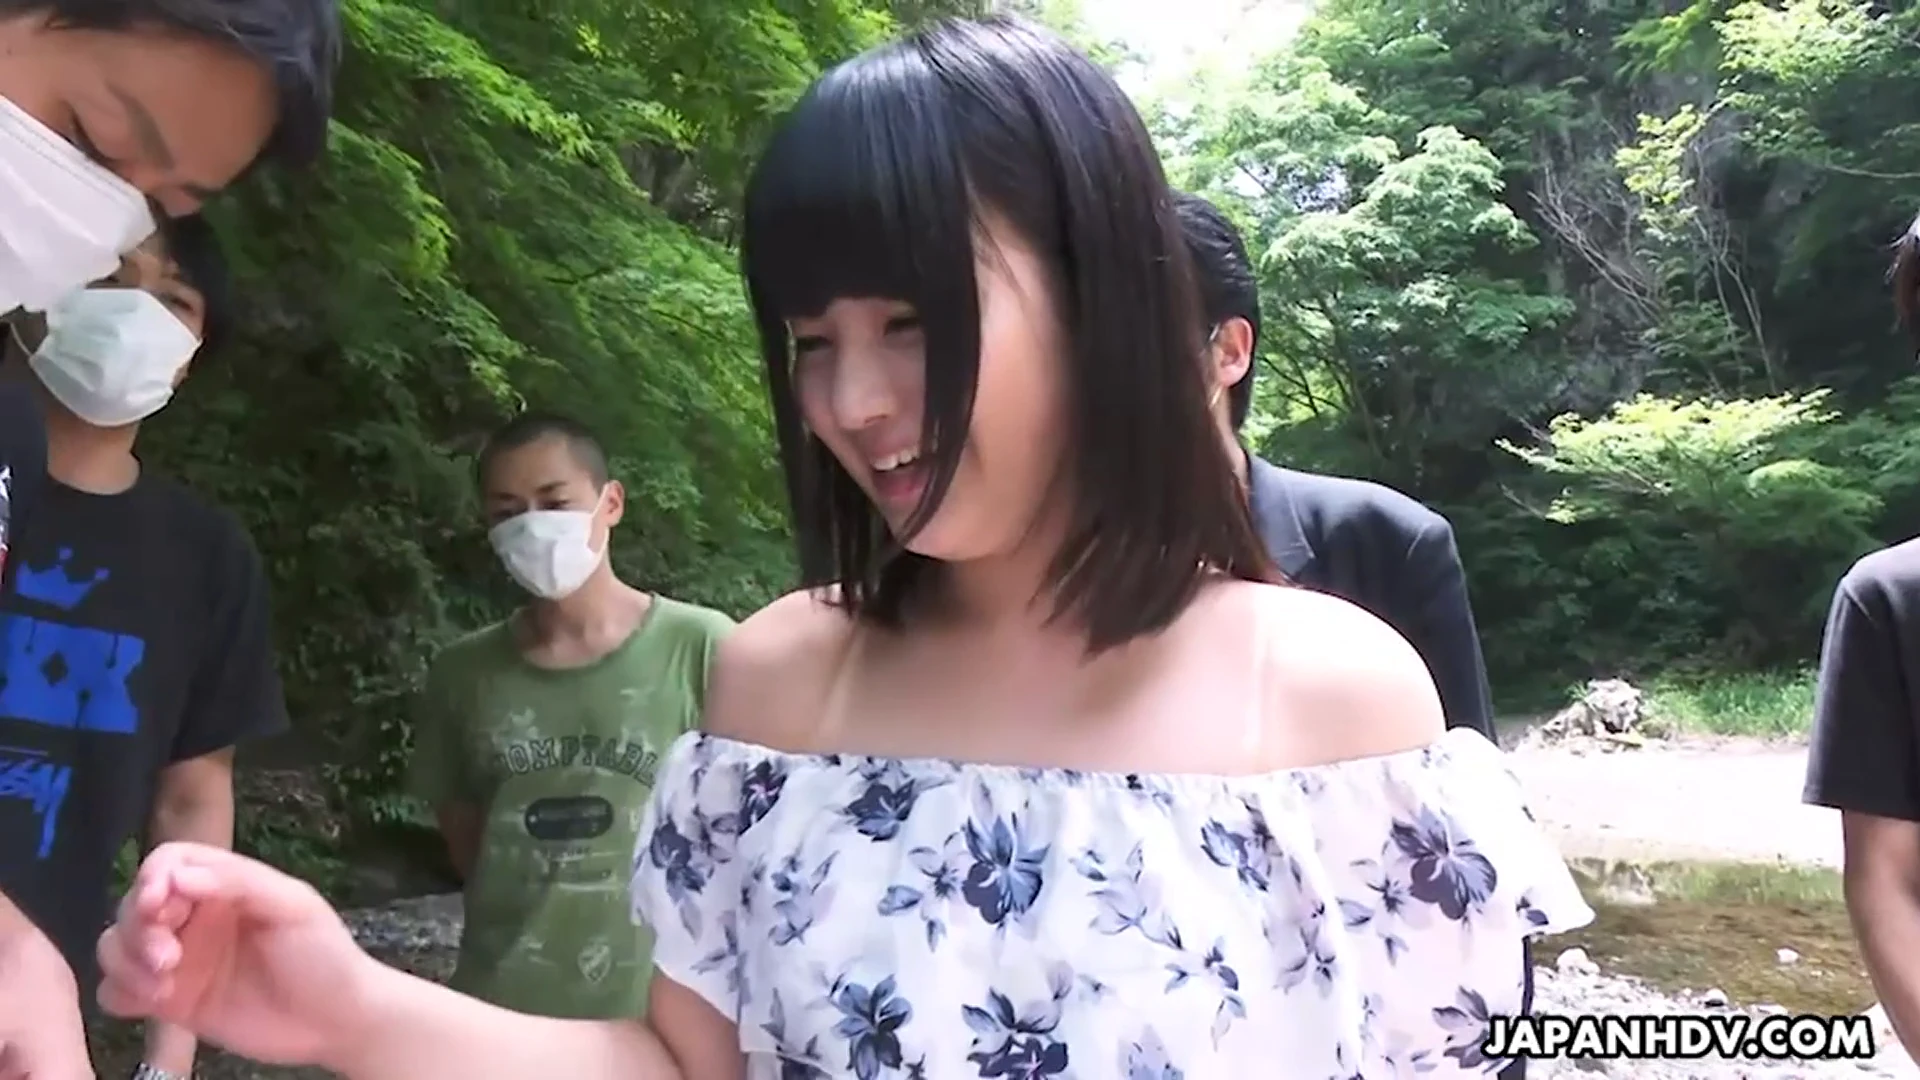 Tsuna Kimura is outdoors with a group of horny men that want their cocks sucked